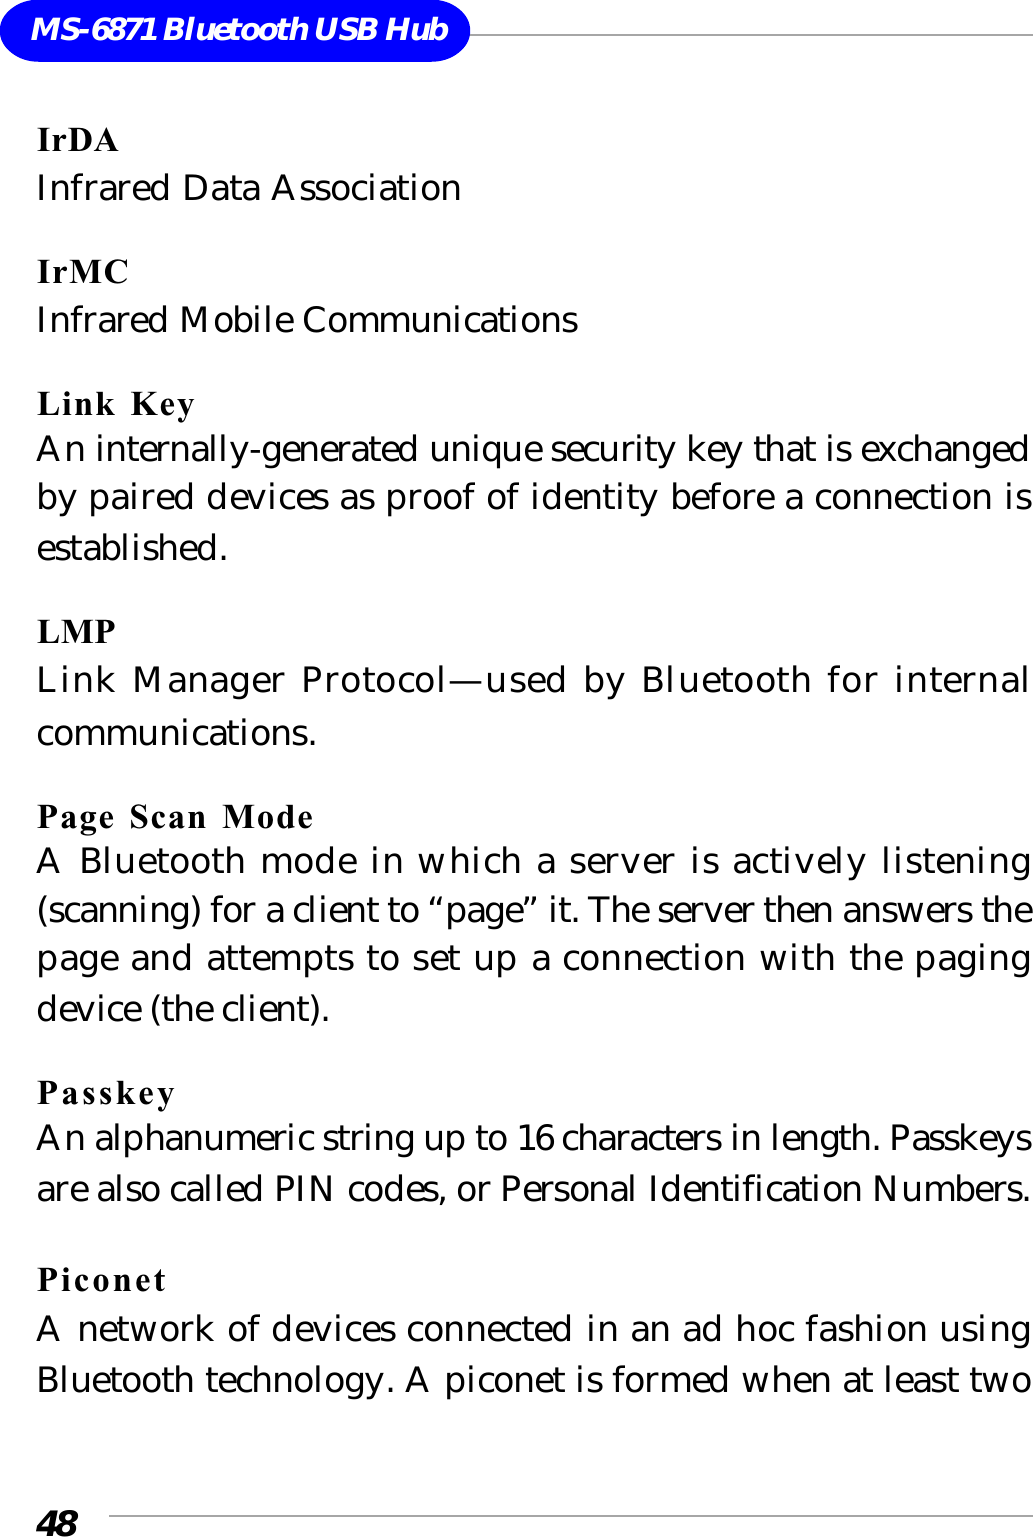 48MS-6871 Bluetooth USB HubIrDAInfrared Data AssociationIrMCInfrared Mobile CommunicationsLink KeyAn internally-generated unique security key that is exchangedby paired devices as proof of identity before a connection isestablished.LMPLink Manager Protocol—used by Bluetooth for internalcommunications.Page Scan ModeA Bluetooth mode in which a server is actively listening(scanning) for a client to “page” it. The server then answers thepage and attempts to set up a connection with the pagingdevice (the client).PasskeyAn alphanumeric string up to 16 characters in length. Passkeysare also called PIN codes, or Personal Identification Numbers.PiconetA network of devices connected in an ad hoc fashion usingBluetooth technology. A piconet is formed when at least two